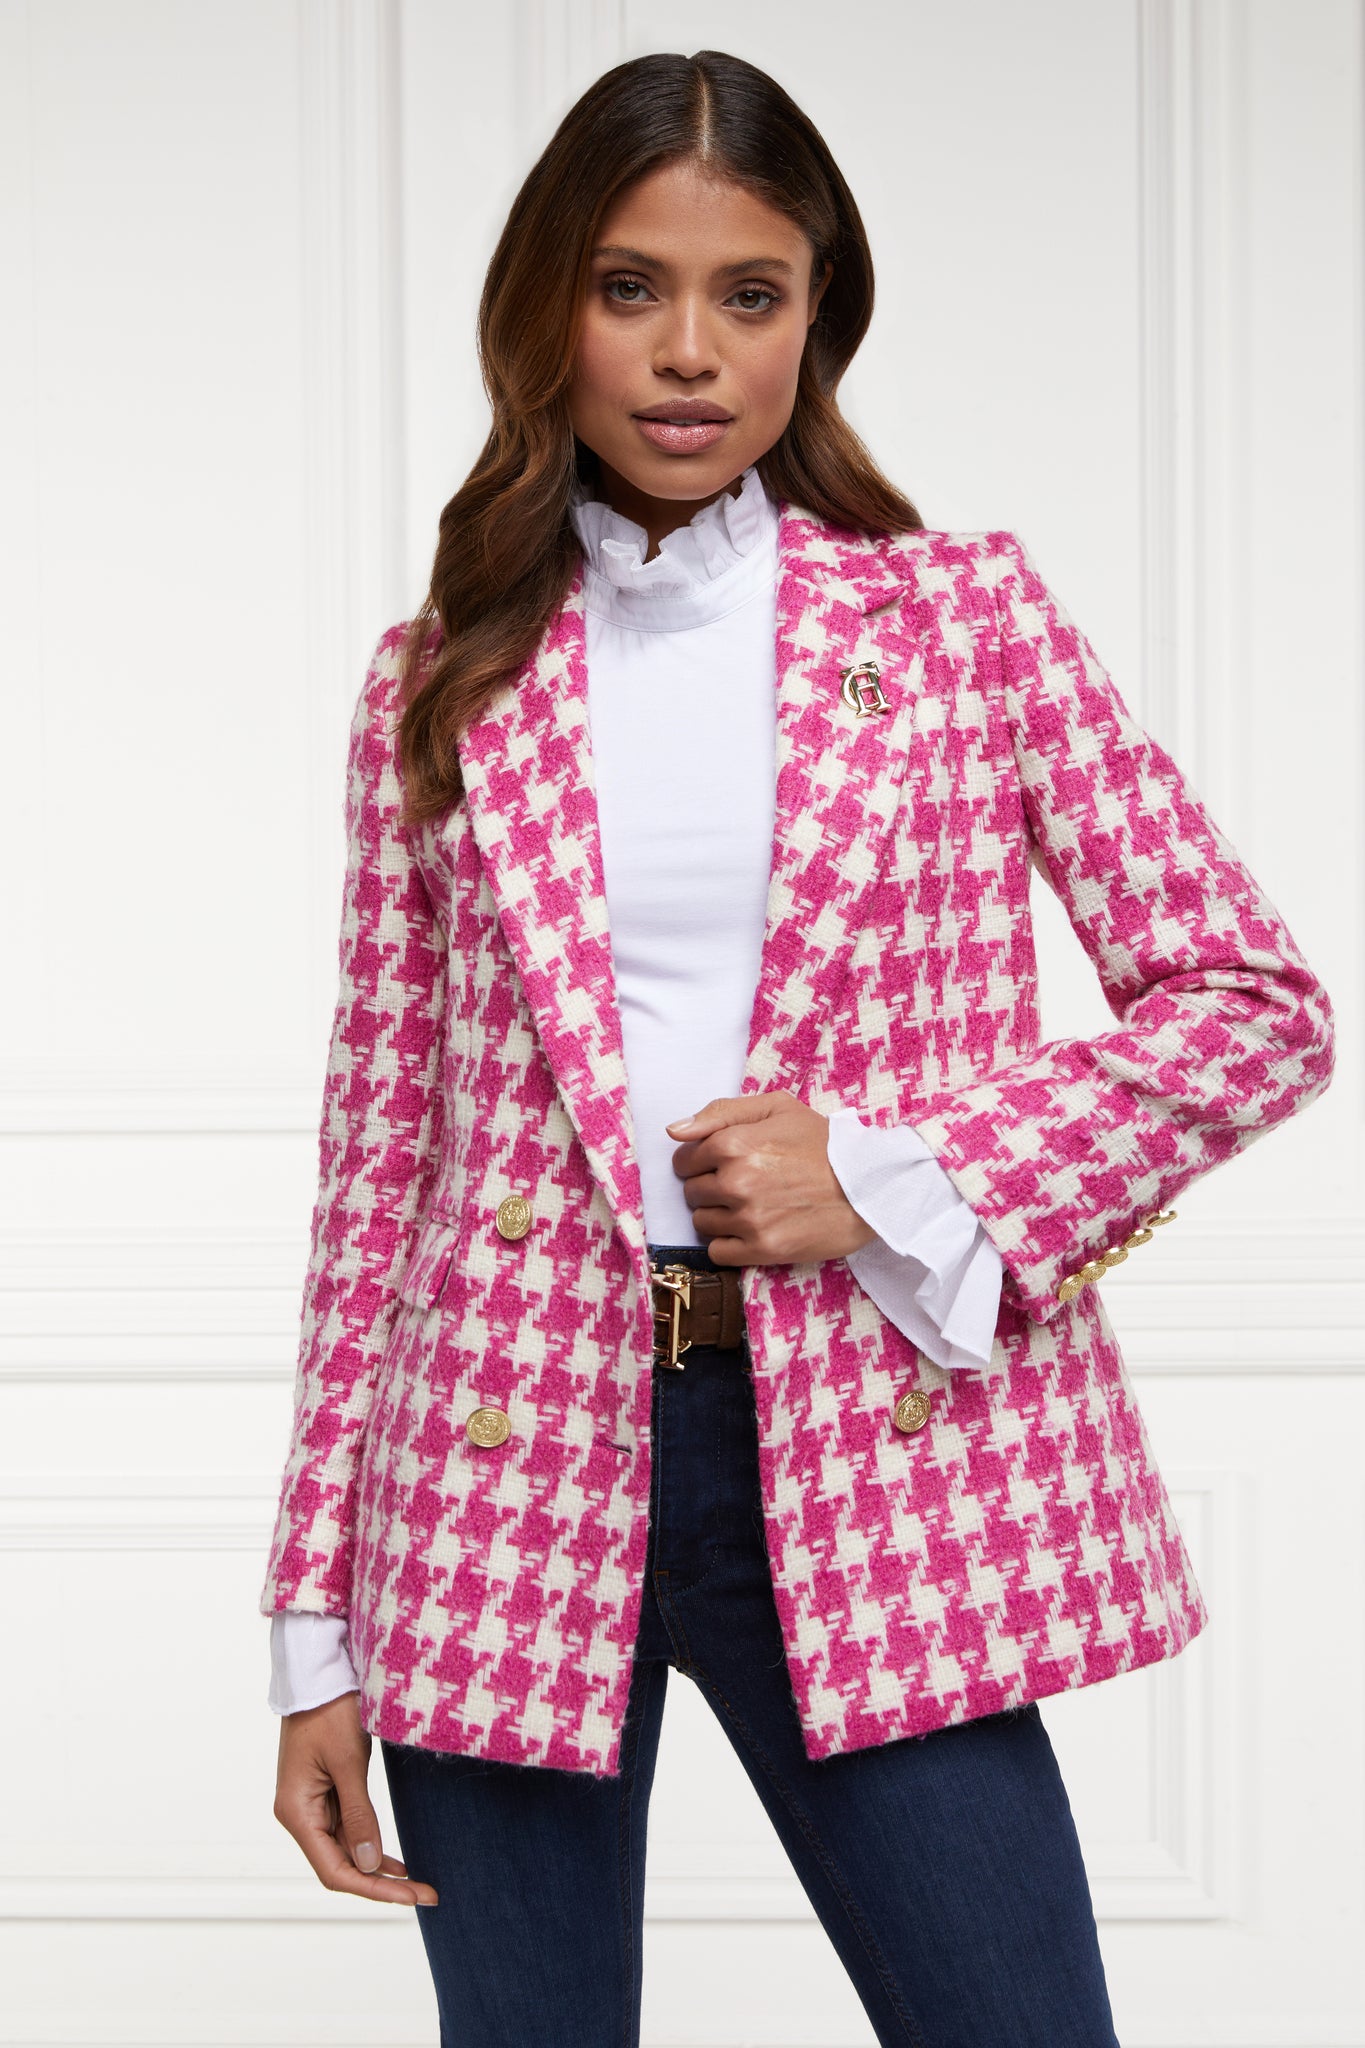 double breasted wool blazer in hot pink large scale houndstooth with two hip pockets and gold button detials down front and on cuffs and handmade in the uk 